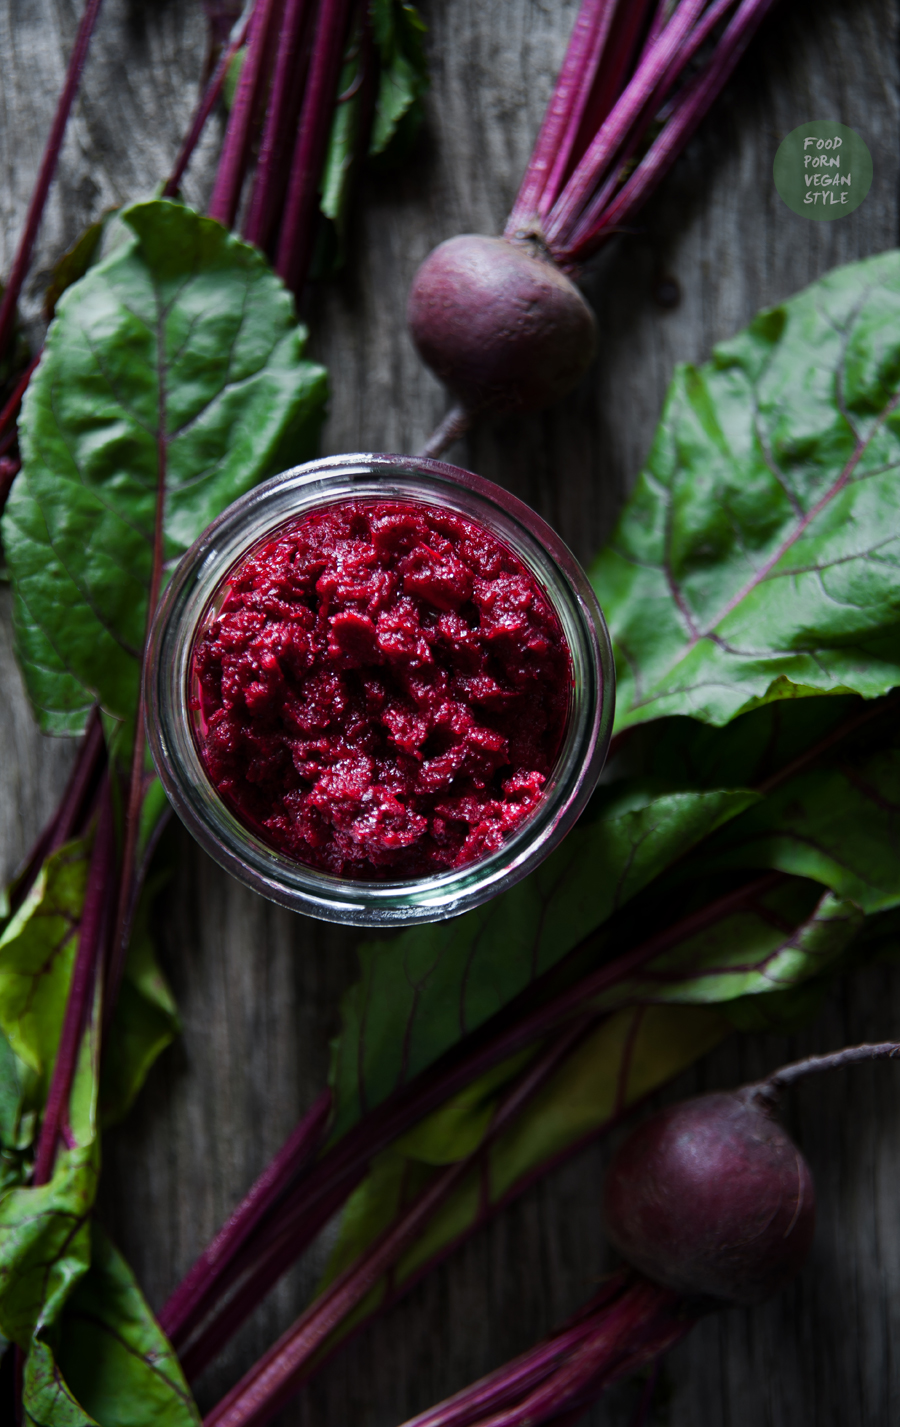 Young beetroot puree with horseradish